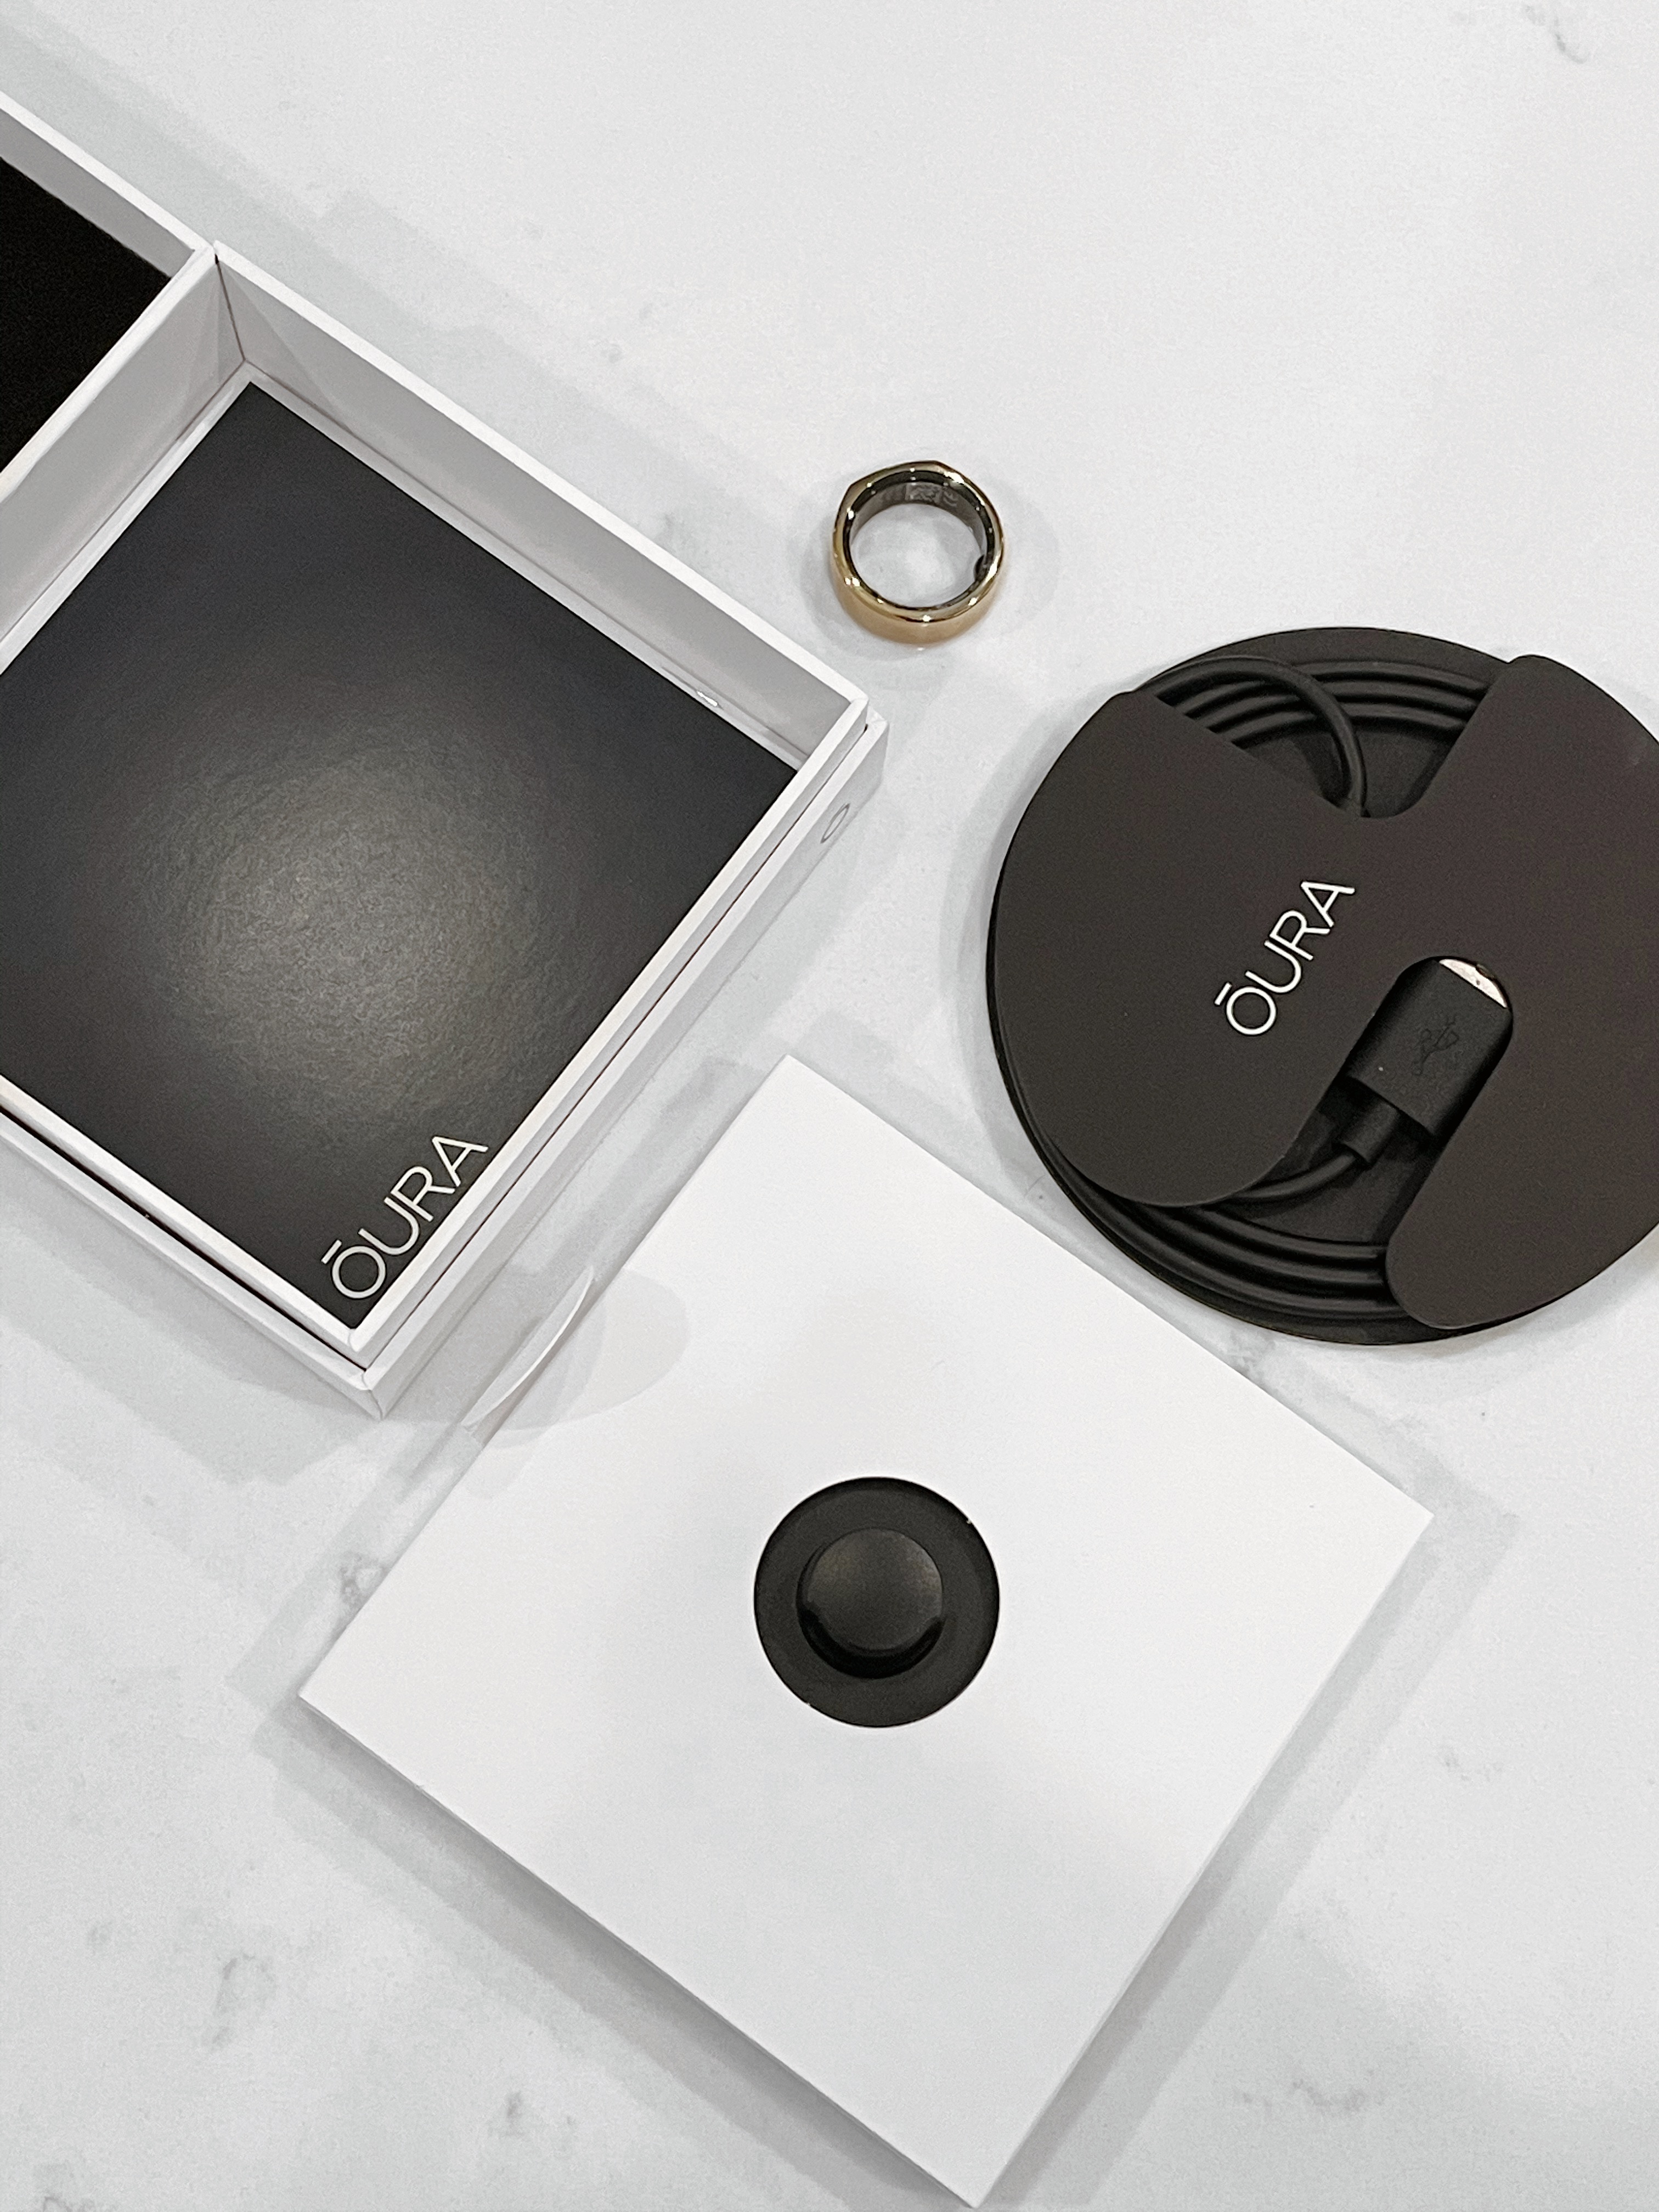 OURA RING UNBOXING + set-up with Natural Cycles 